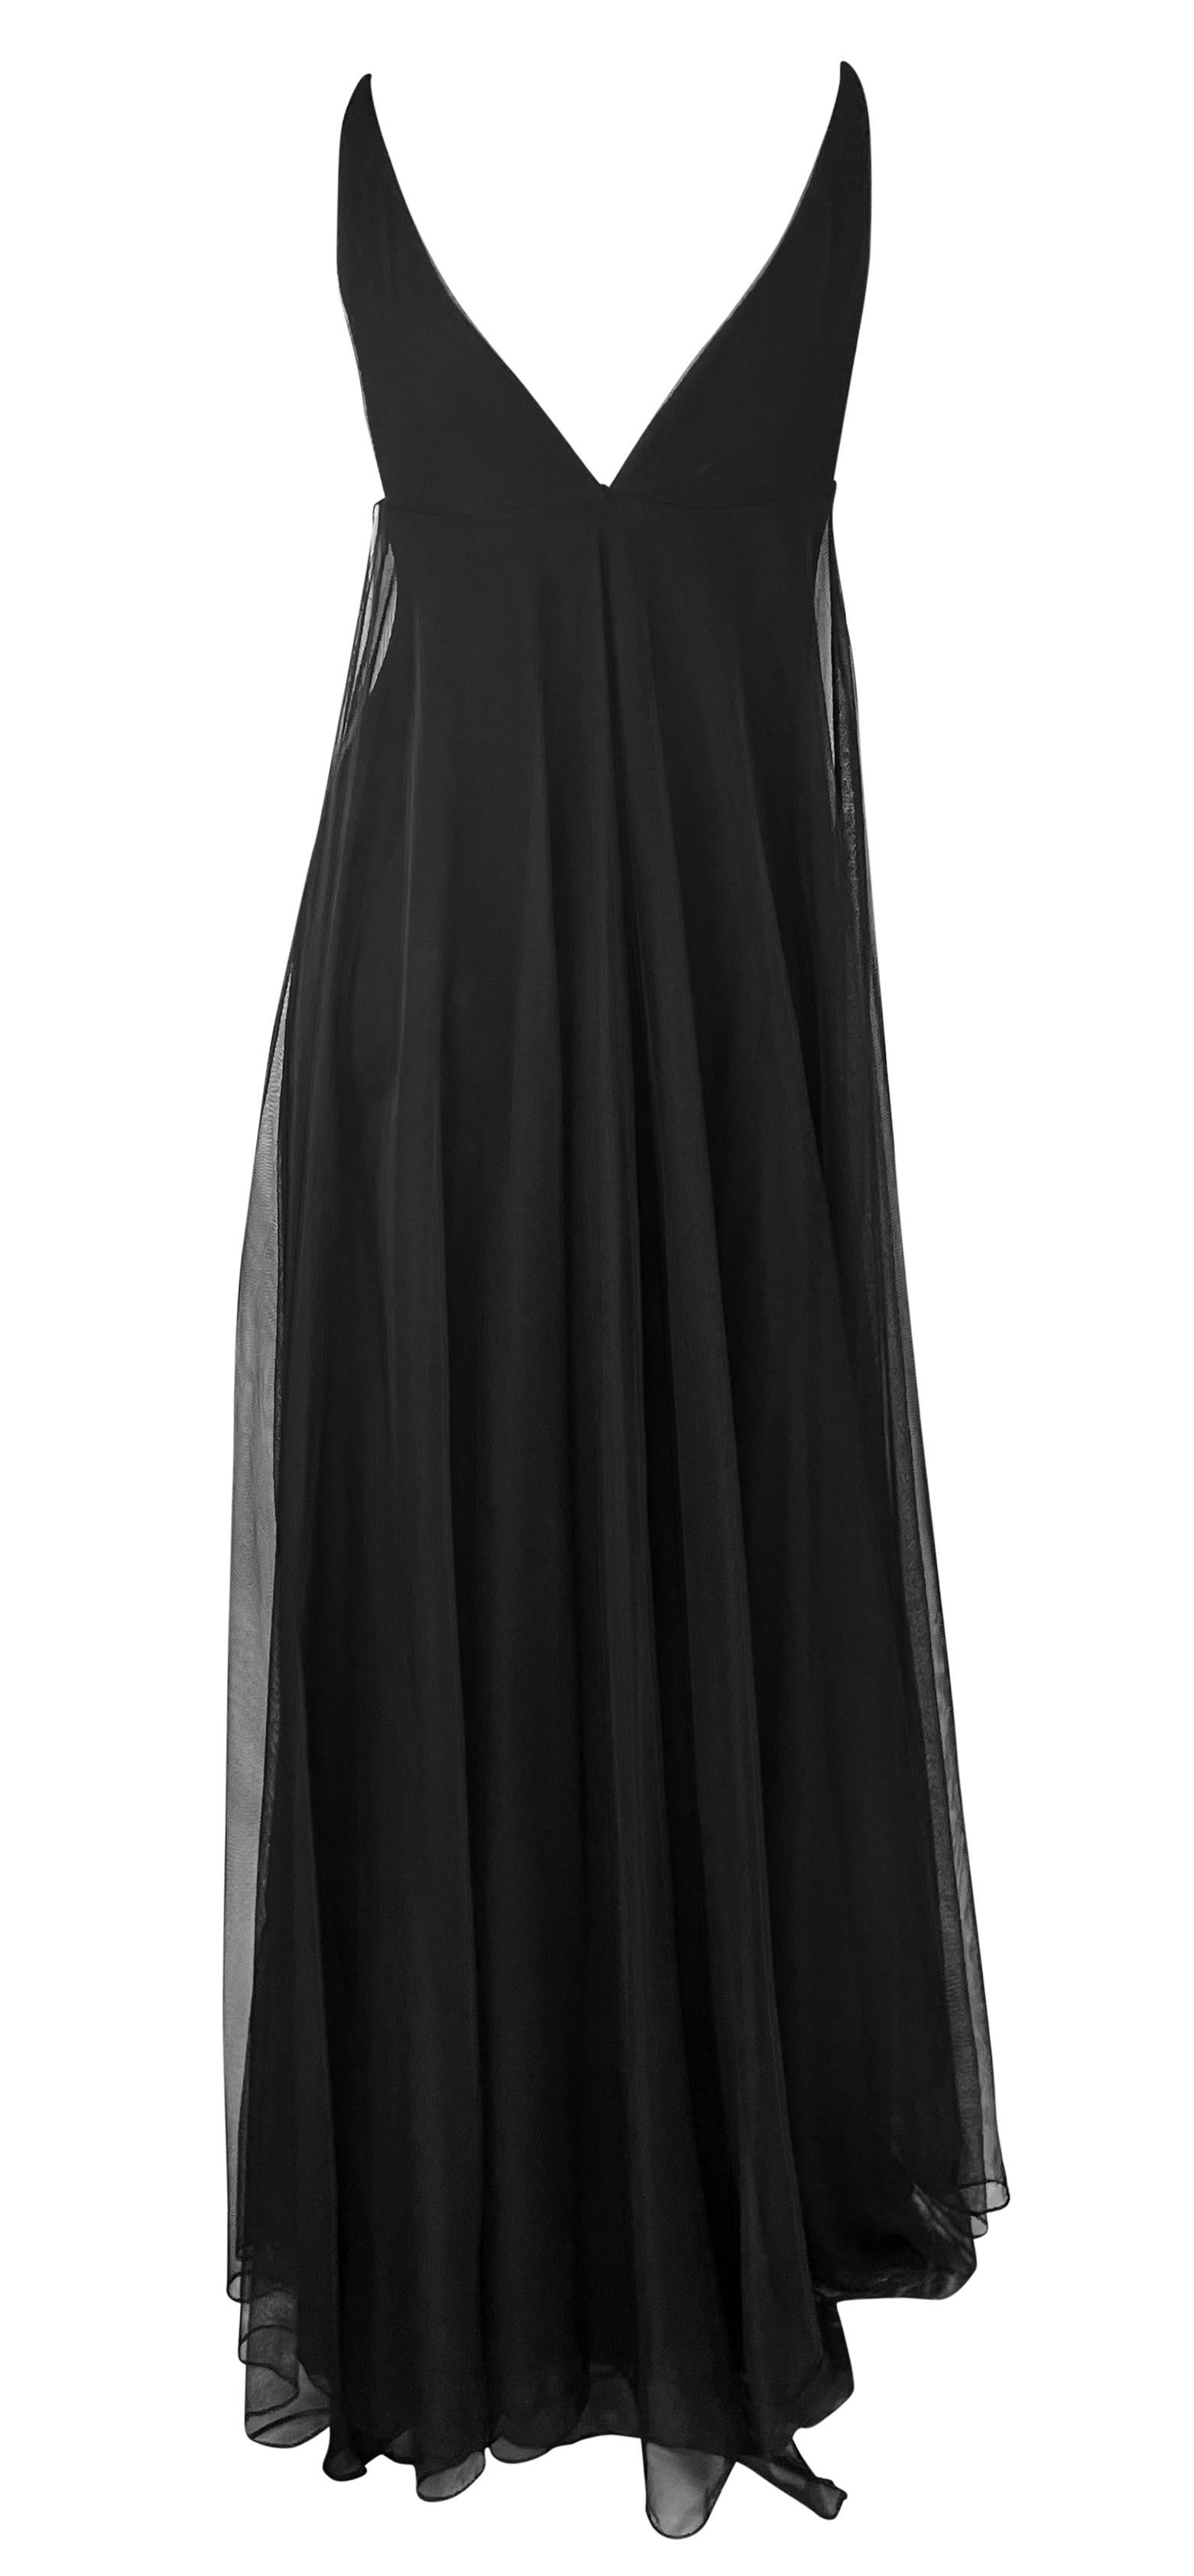 F/W 1998 Gucci by Tom Ford Runway Black Layered Tulle Sheer Plunge Gown For Sale 5